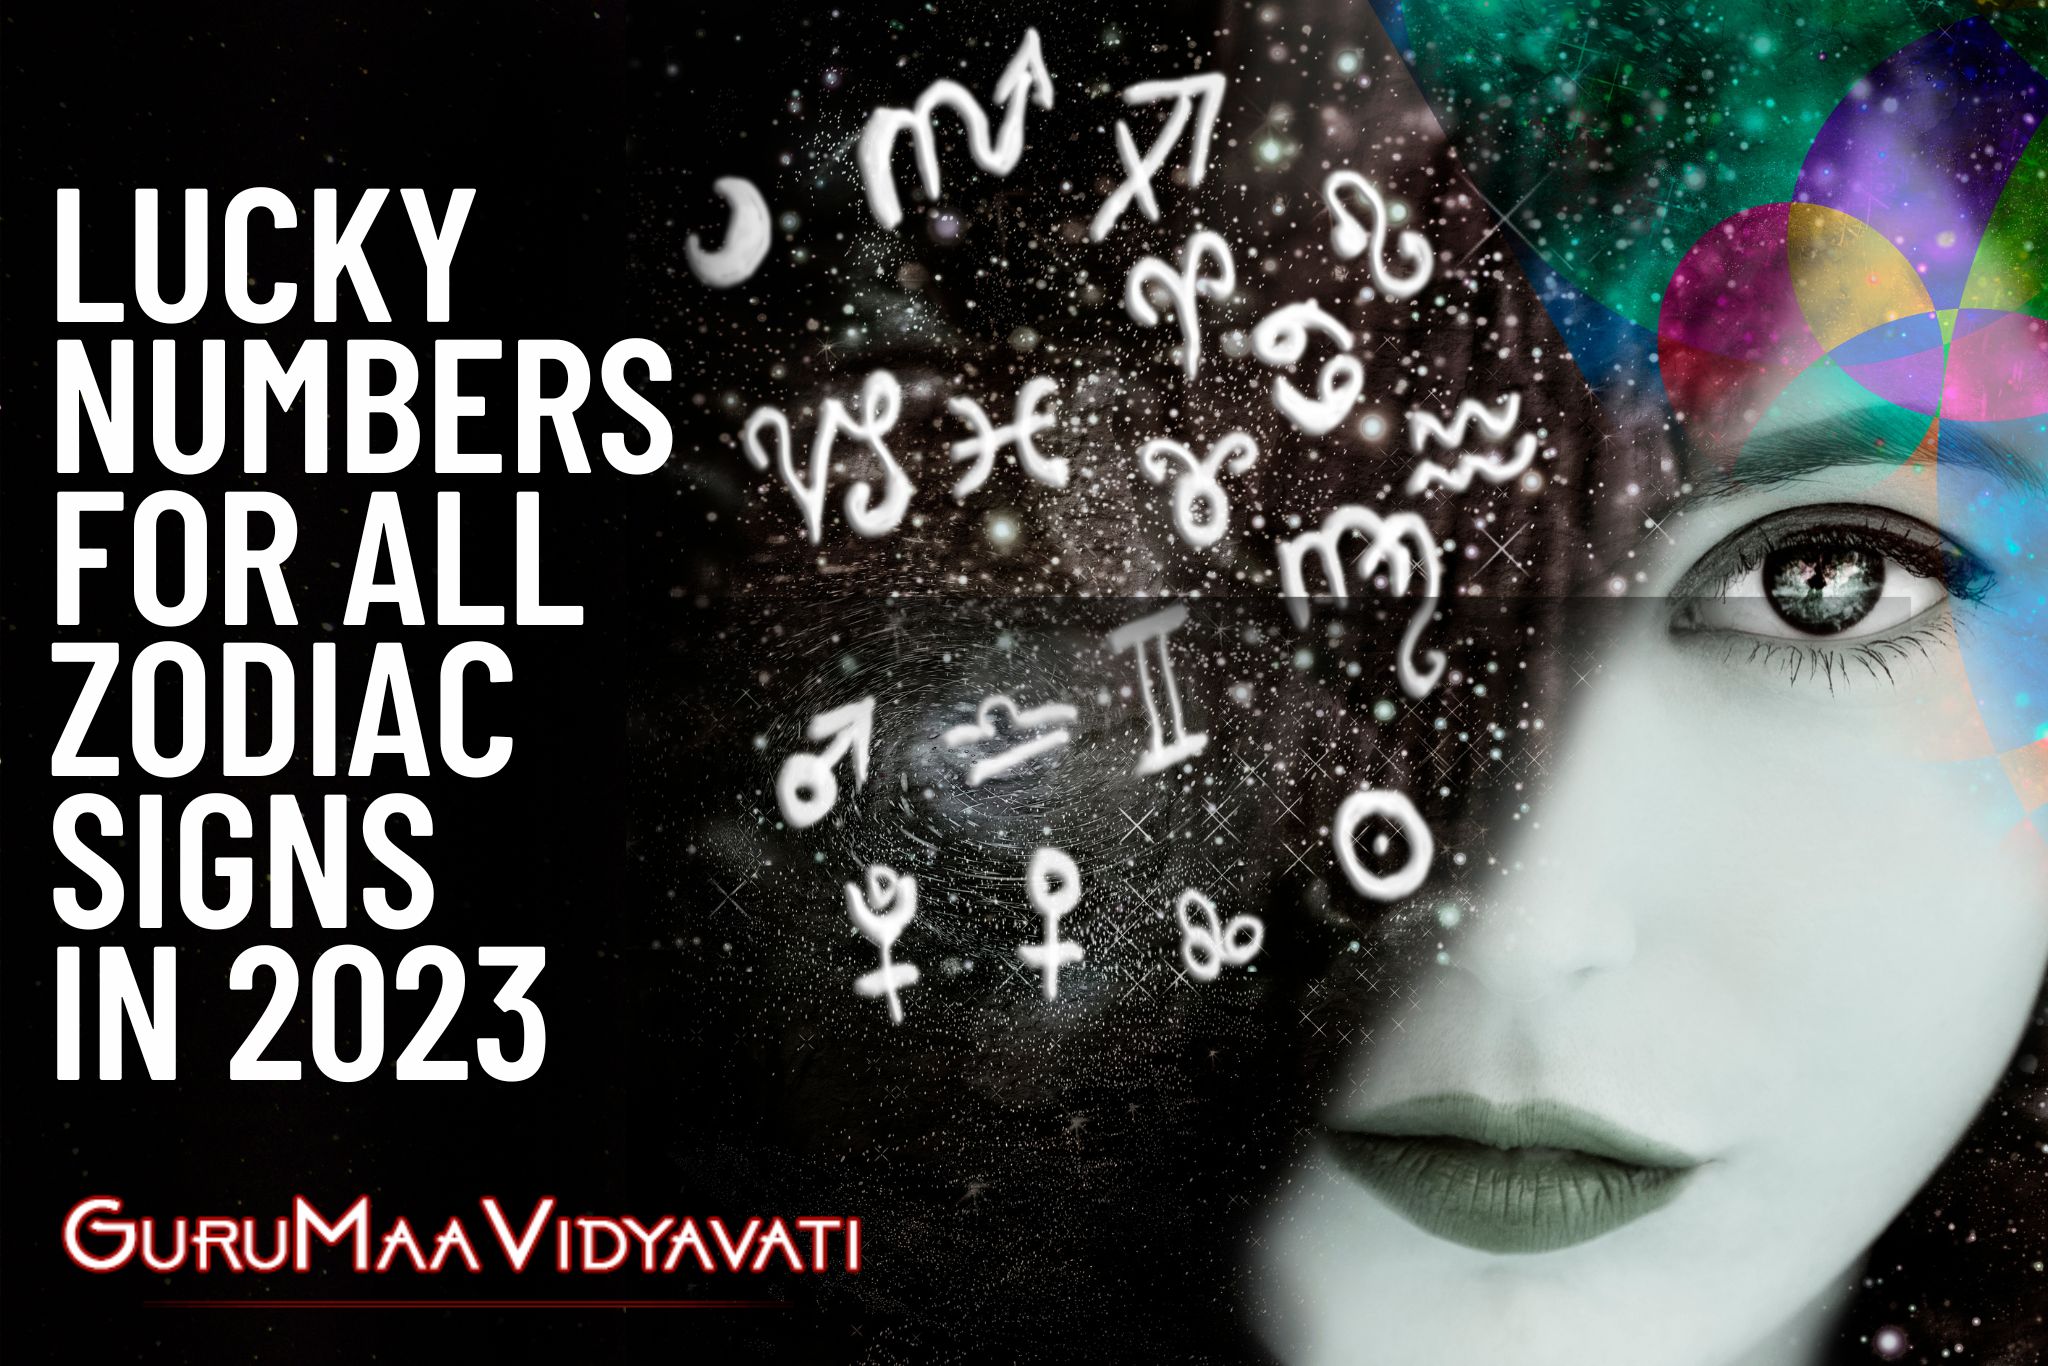 Lucky Numbers for All Zodiac Signs in the Year 2023